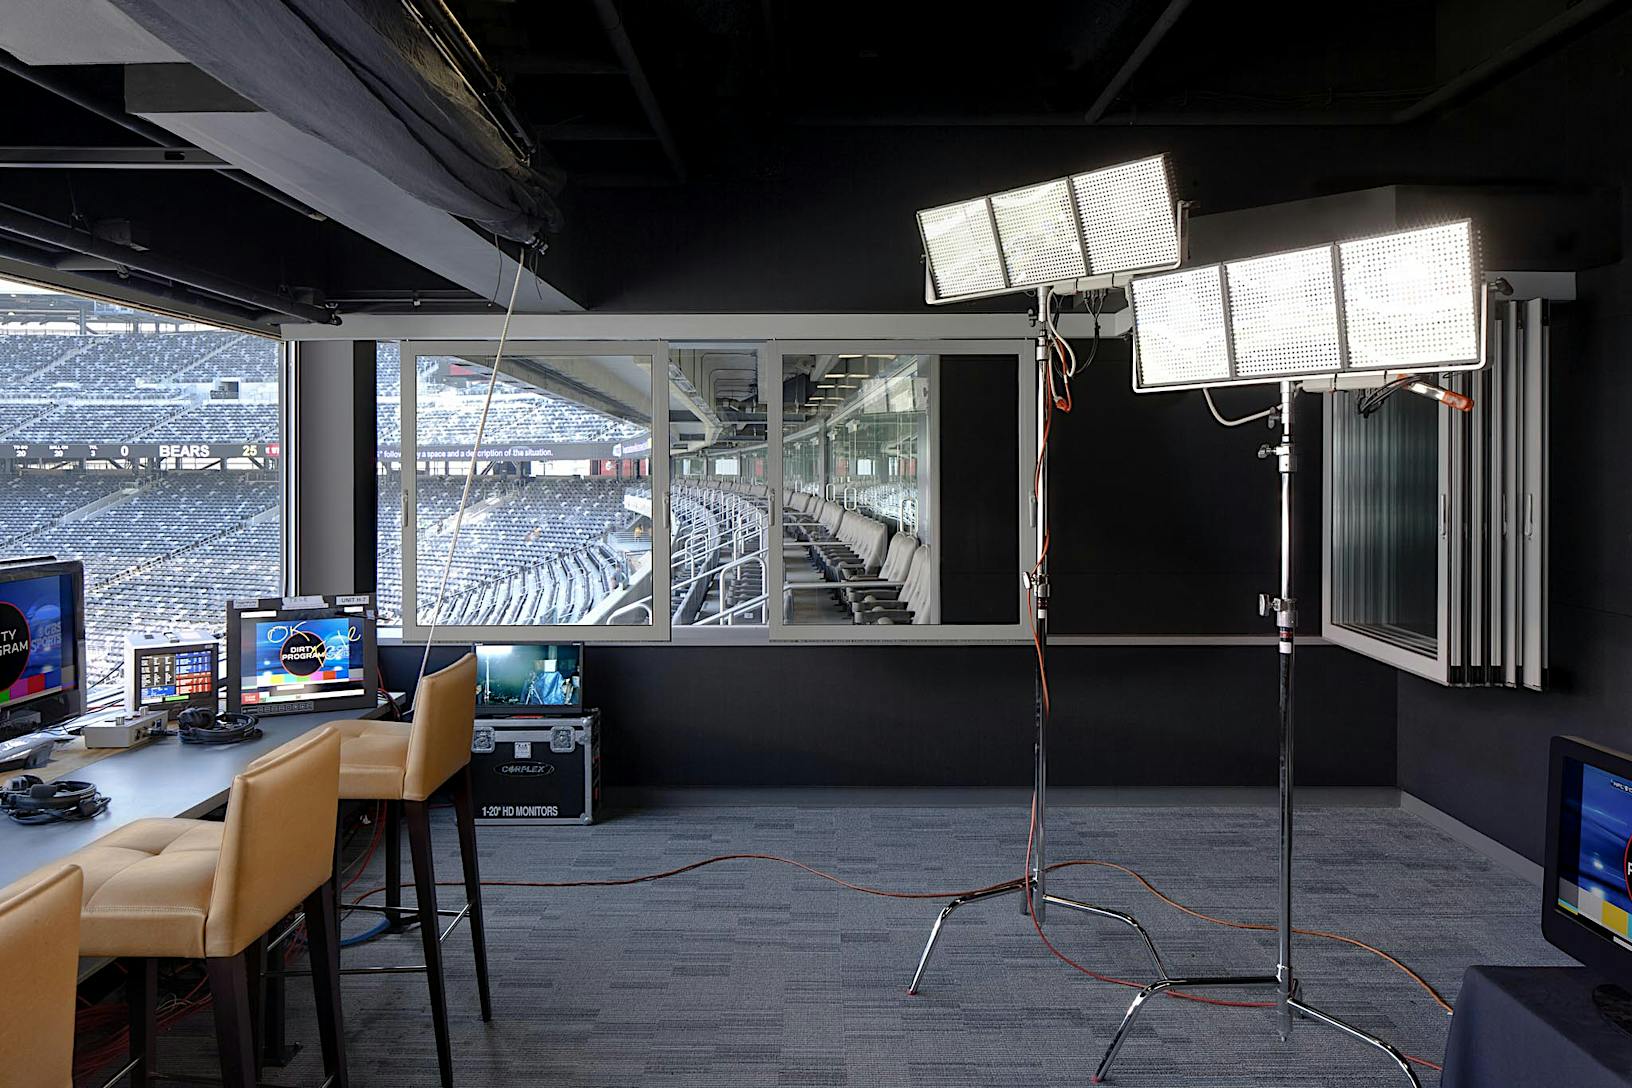 Commercial sliding glass wall at the NY Giants and Jets Stadium